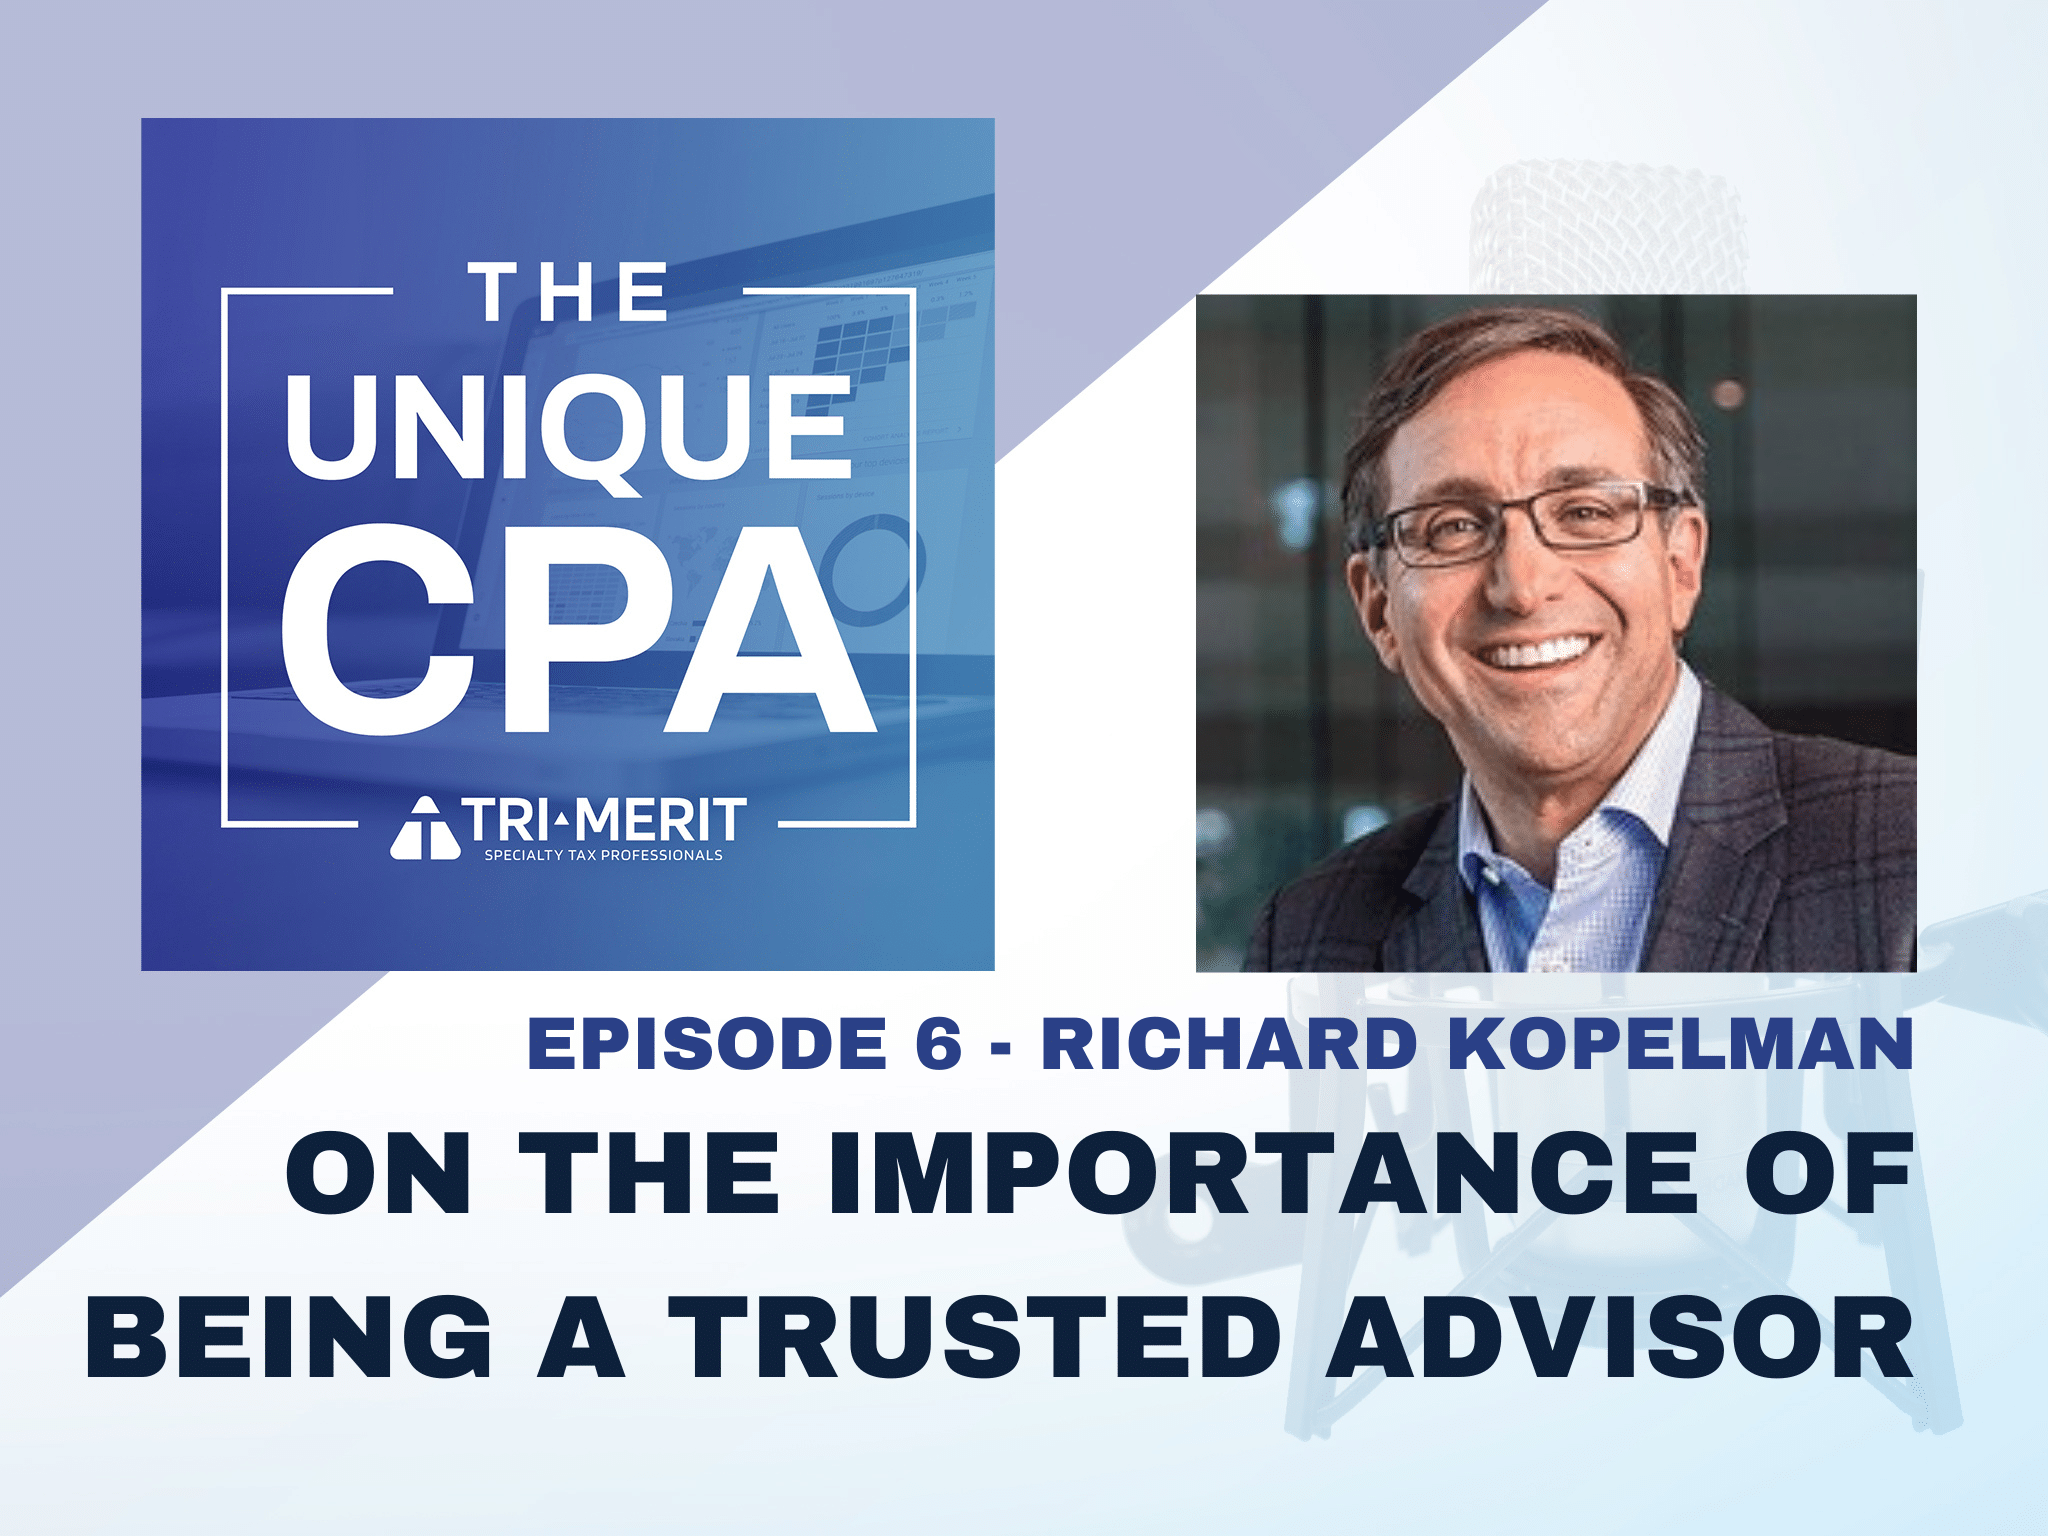 The Unique Cpa Feature Image Ep 6 - On The Importance Of Being A Trusted Advisor - Tri-Merit